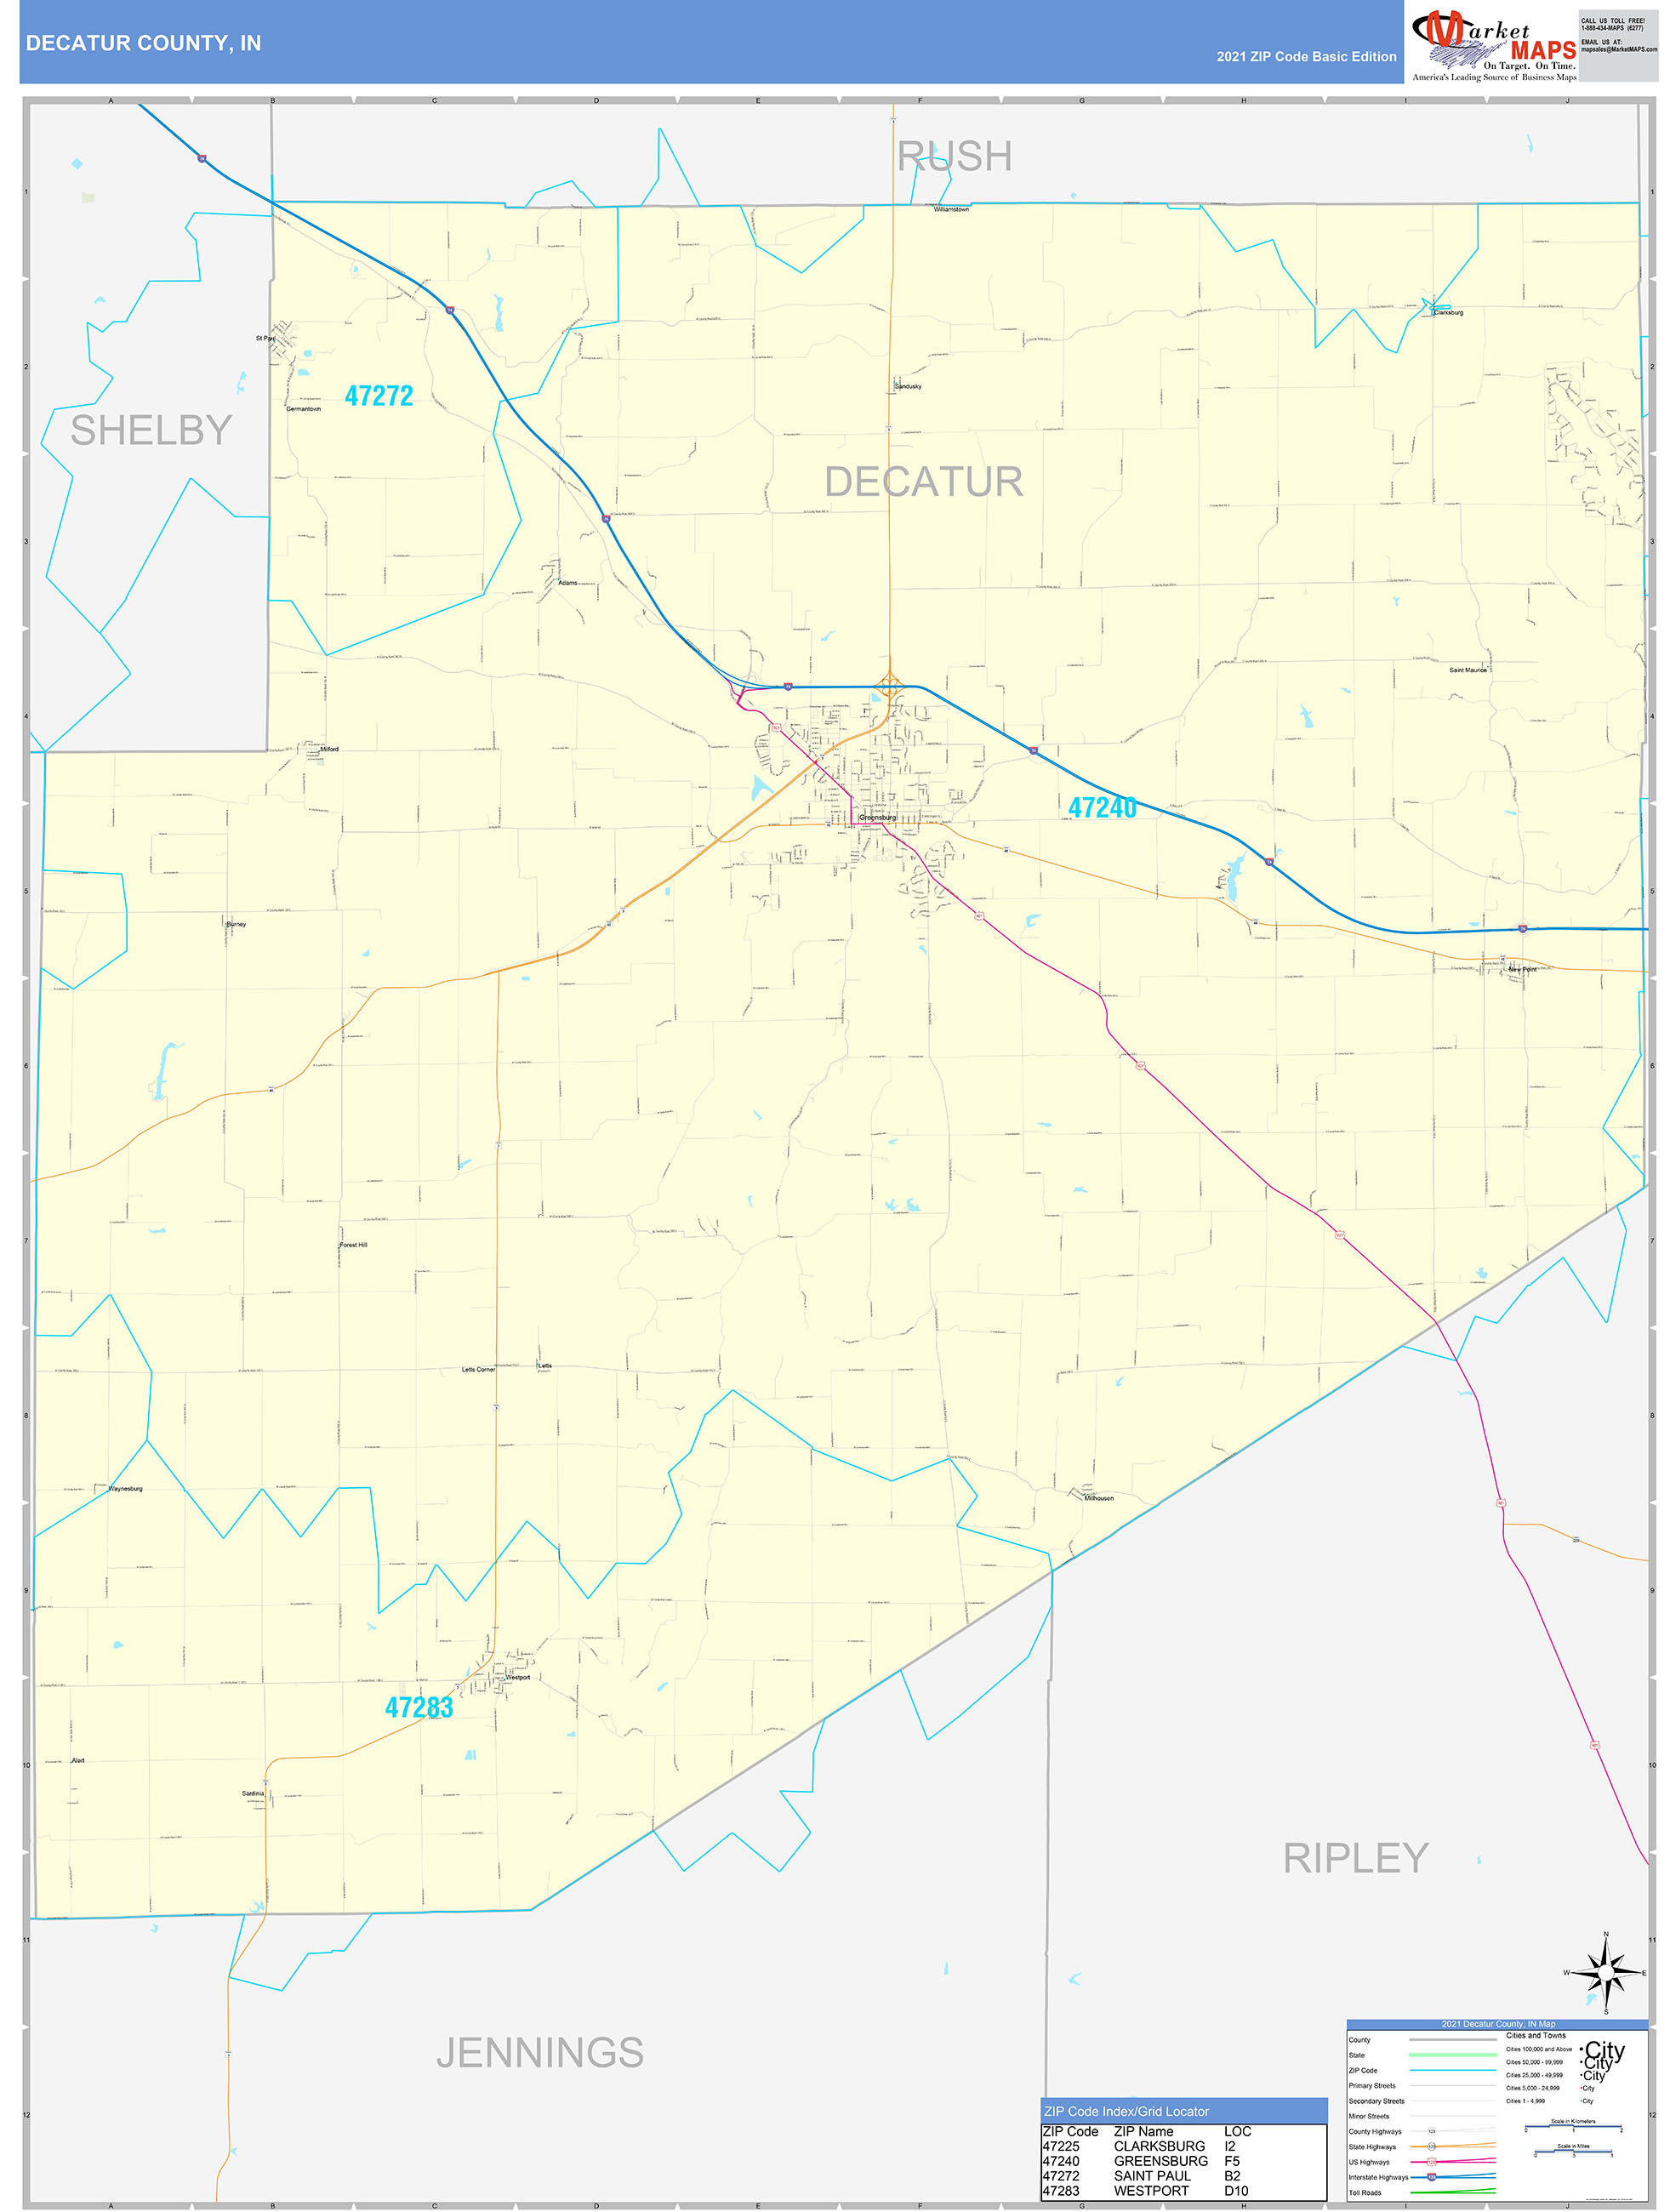 Decatur County, IN Zip Code Wall Map Basic Style by MarketMAPS